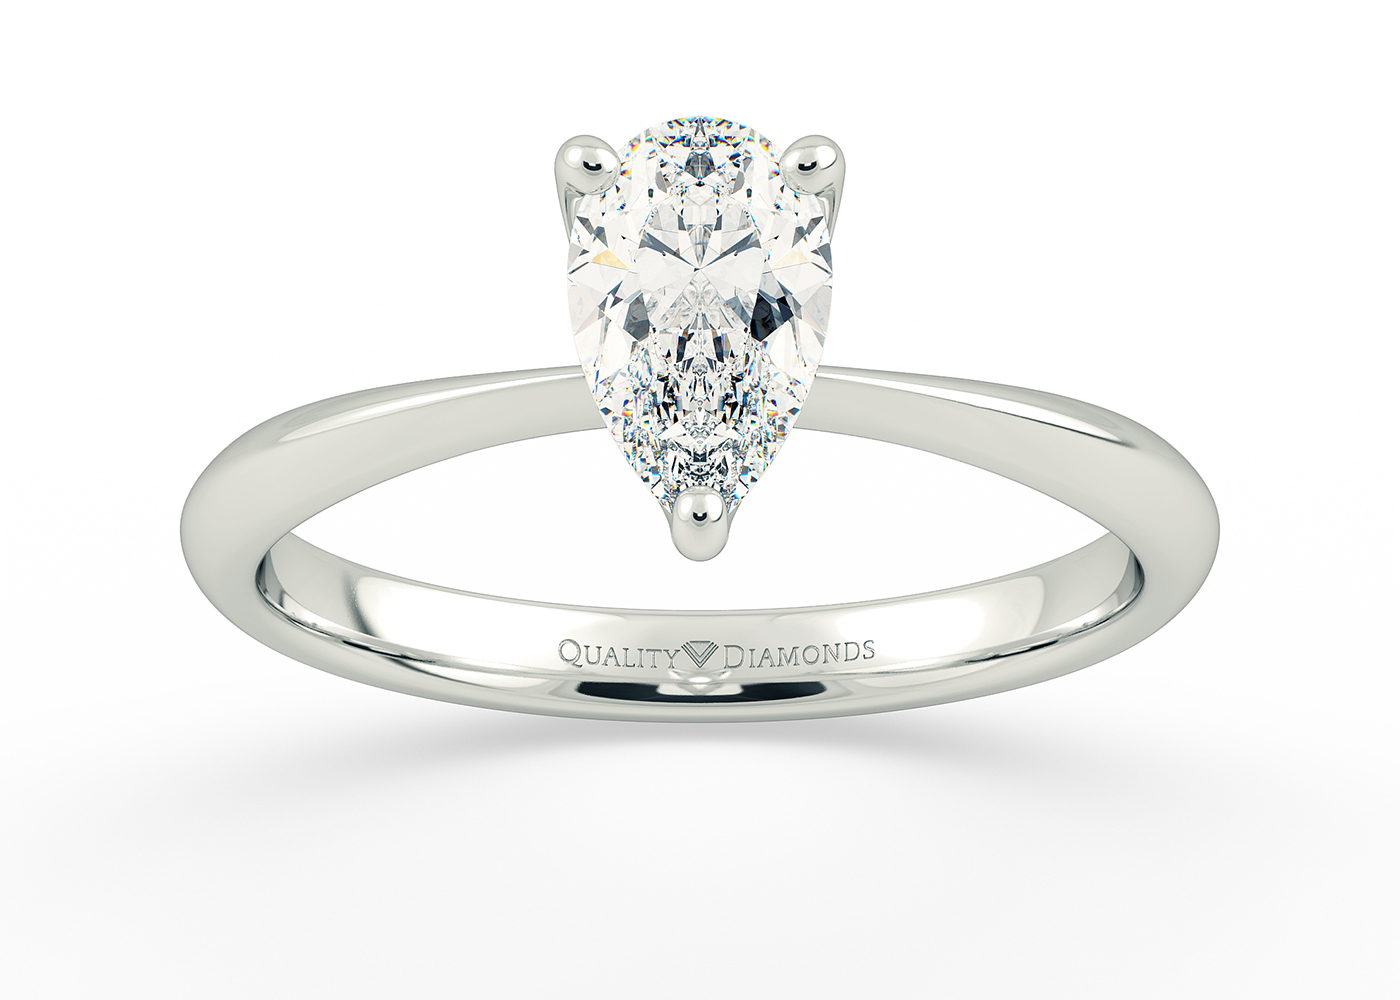 Half Carat Pear Solitaire Diamond Engagement Ring in 18K White Gold